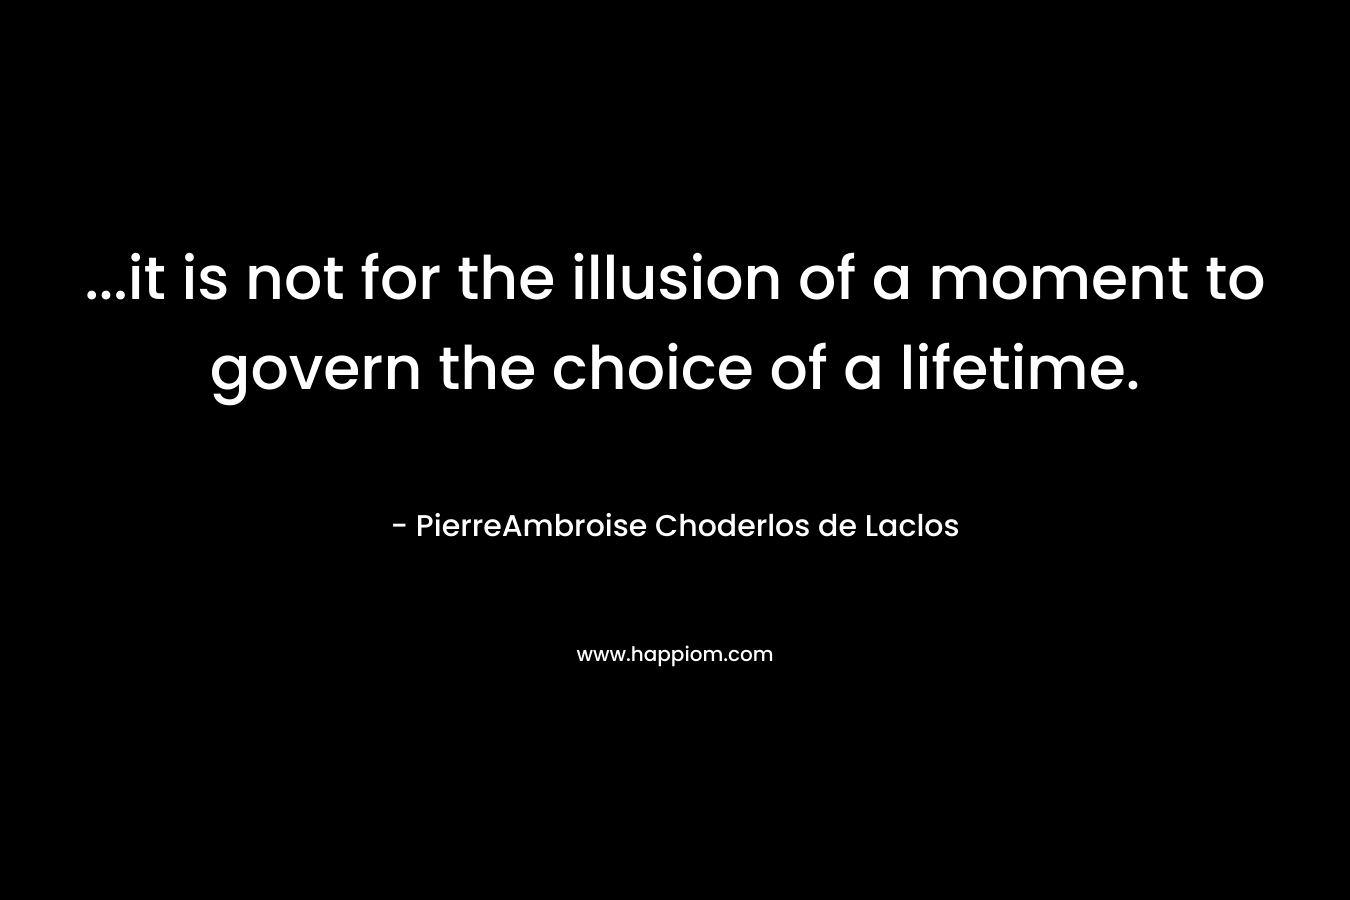 ...it is not for the illusion of a moment to govern the choice of a lifetime.